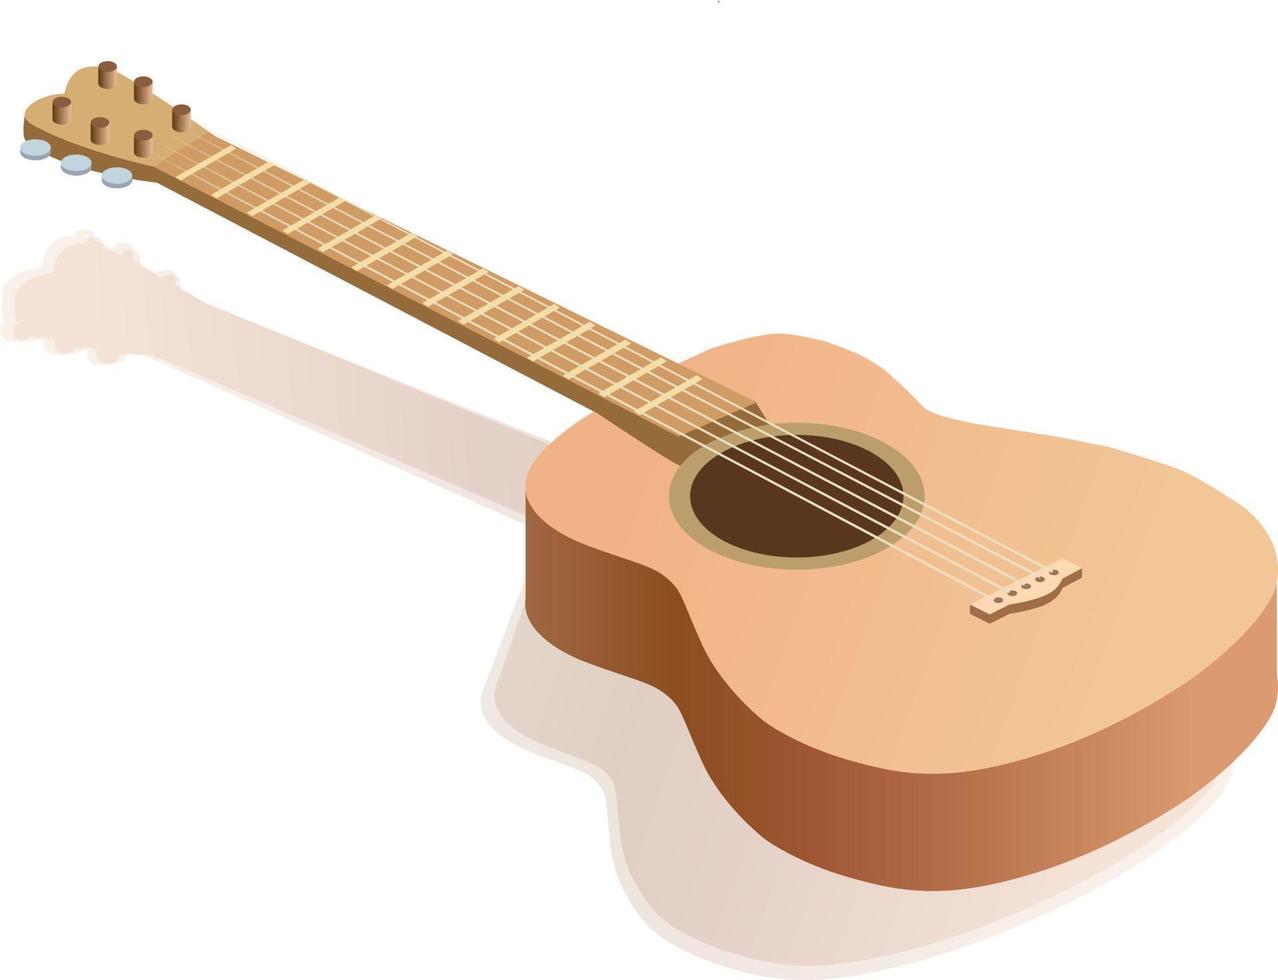 Vector isometric guitar illustration. Isometric acoustic guitar 3D rendering. Classic musical instrument renderind isolater on white background with shadow.